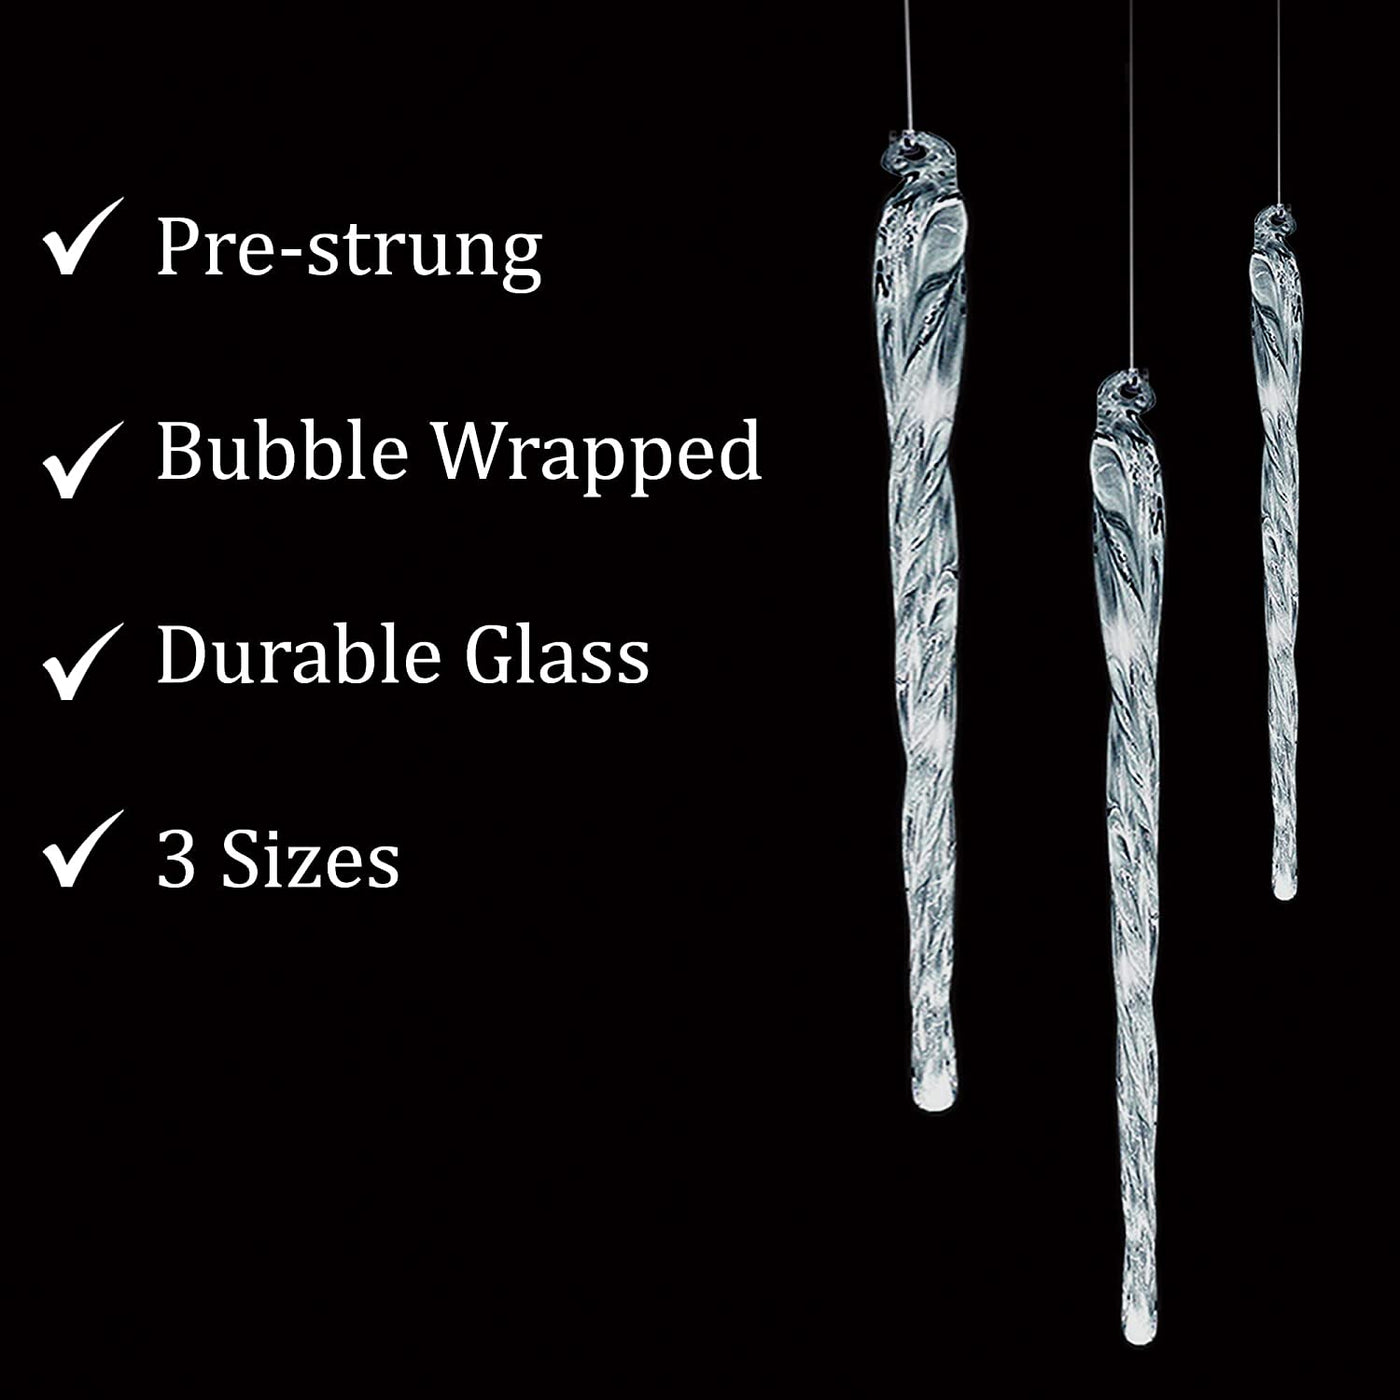 Large Glass Icicle Ornaments for Christmas Tree 7", 5.5", 3.5" (Set of 24) Bulk Christmas Icicle Ornaments Elegant Crystal Look Hanging Decorations by 4E's Novelty